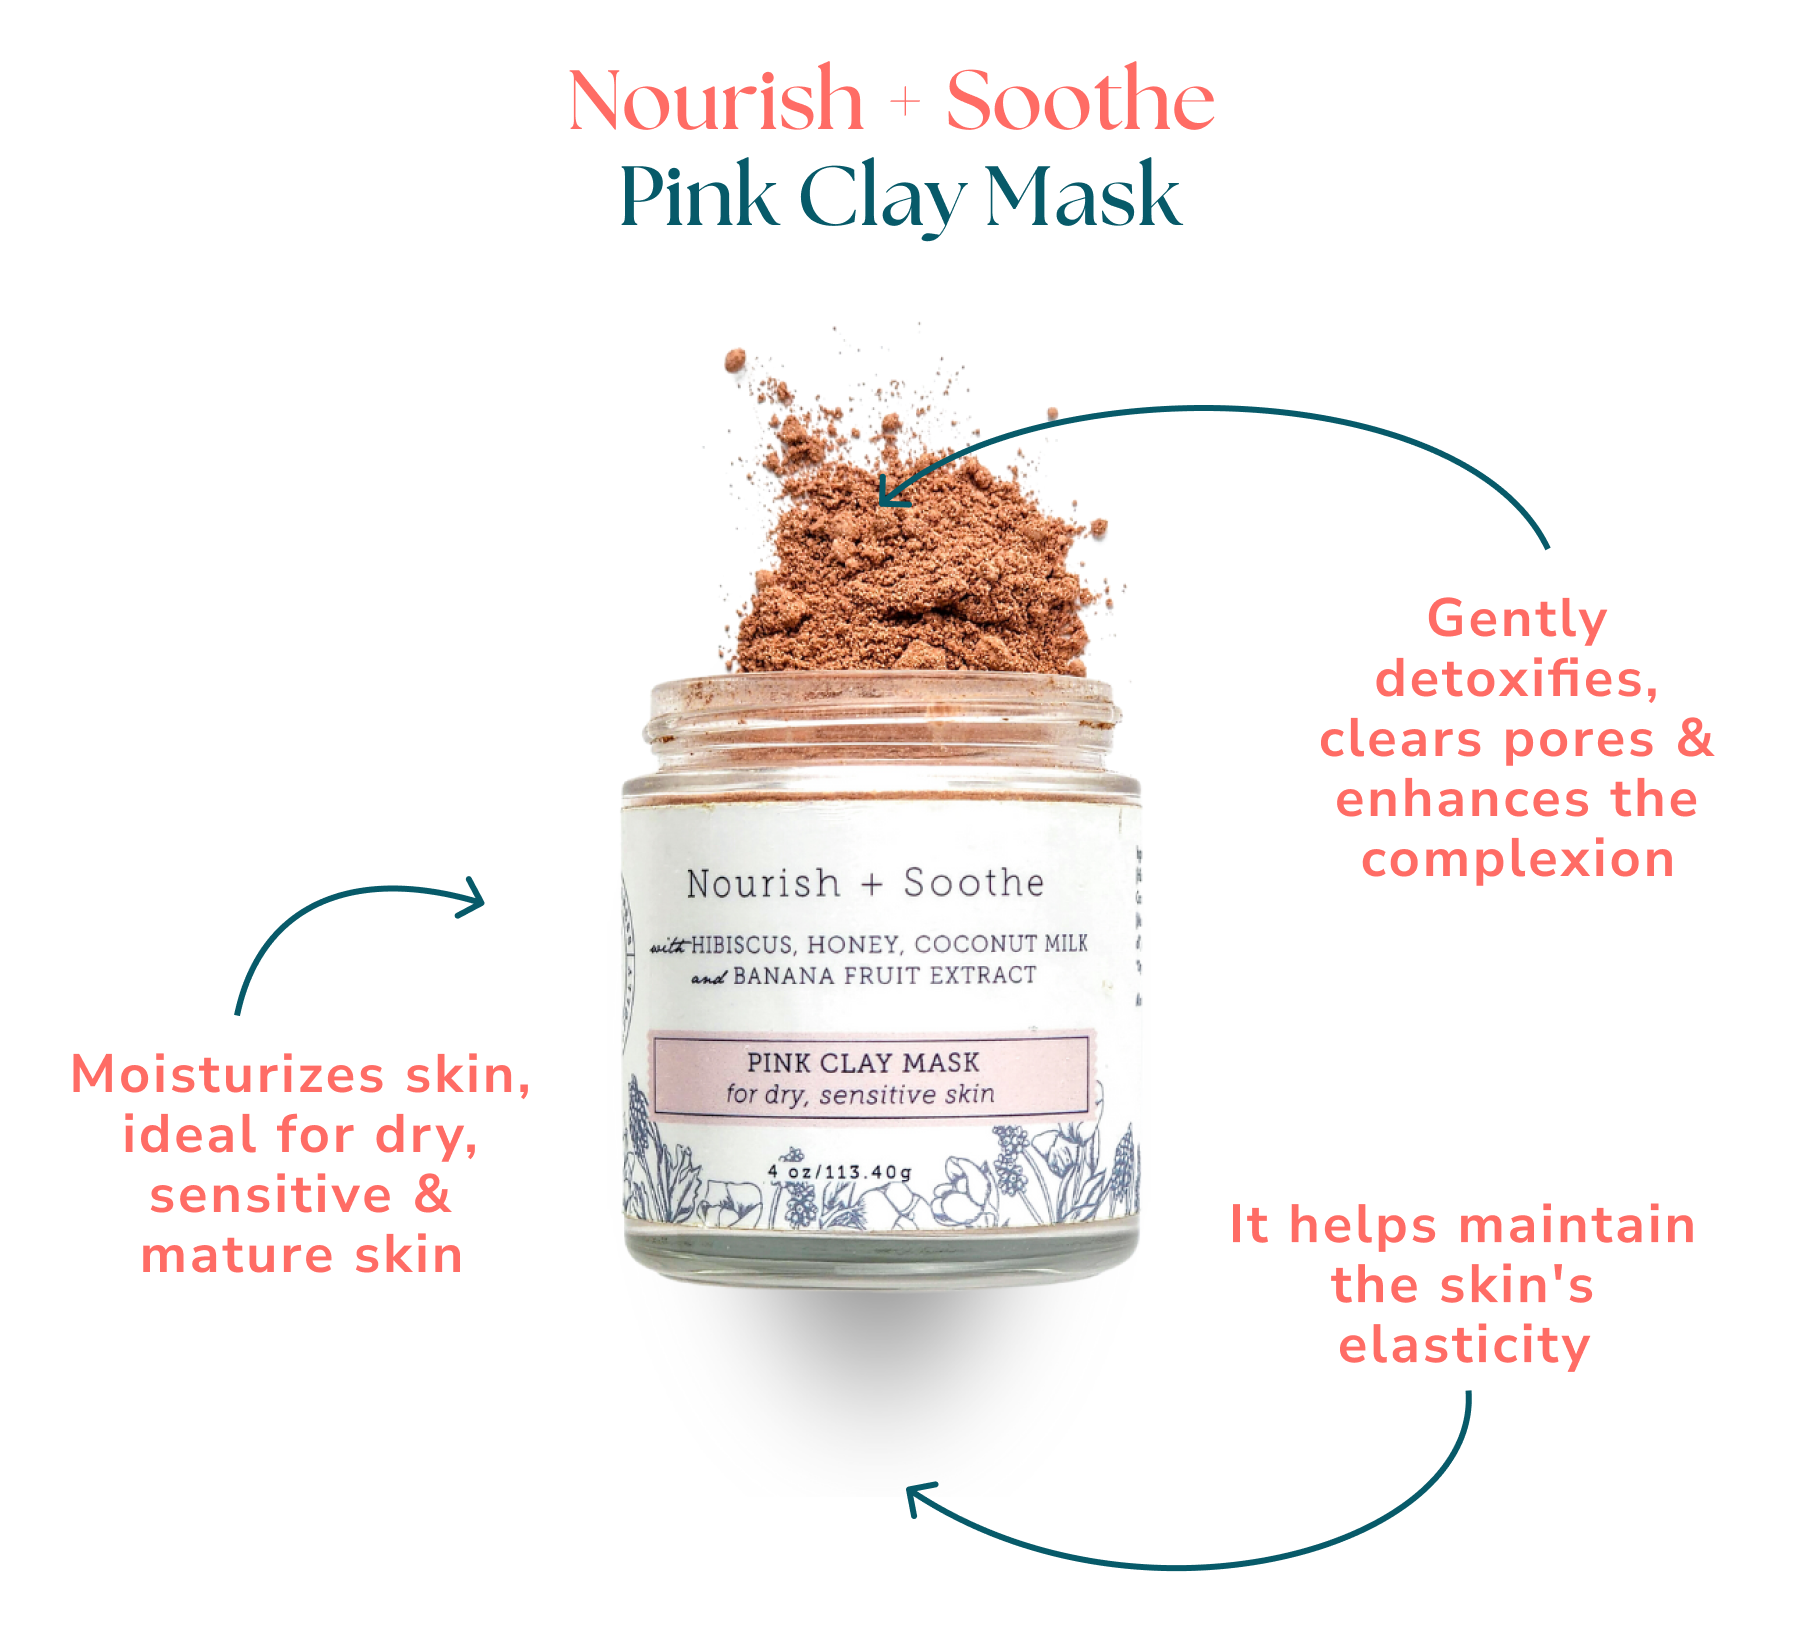 Nourish + Soothe Pink Clay Mask